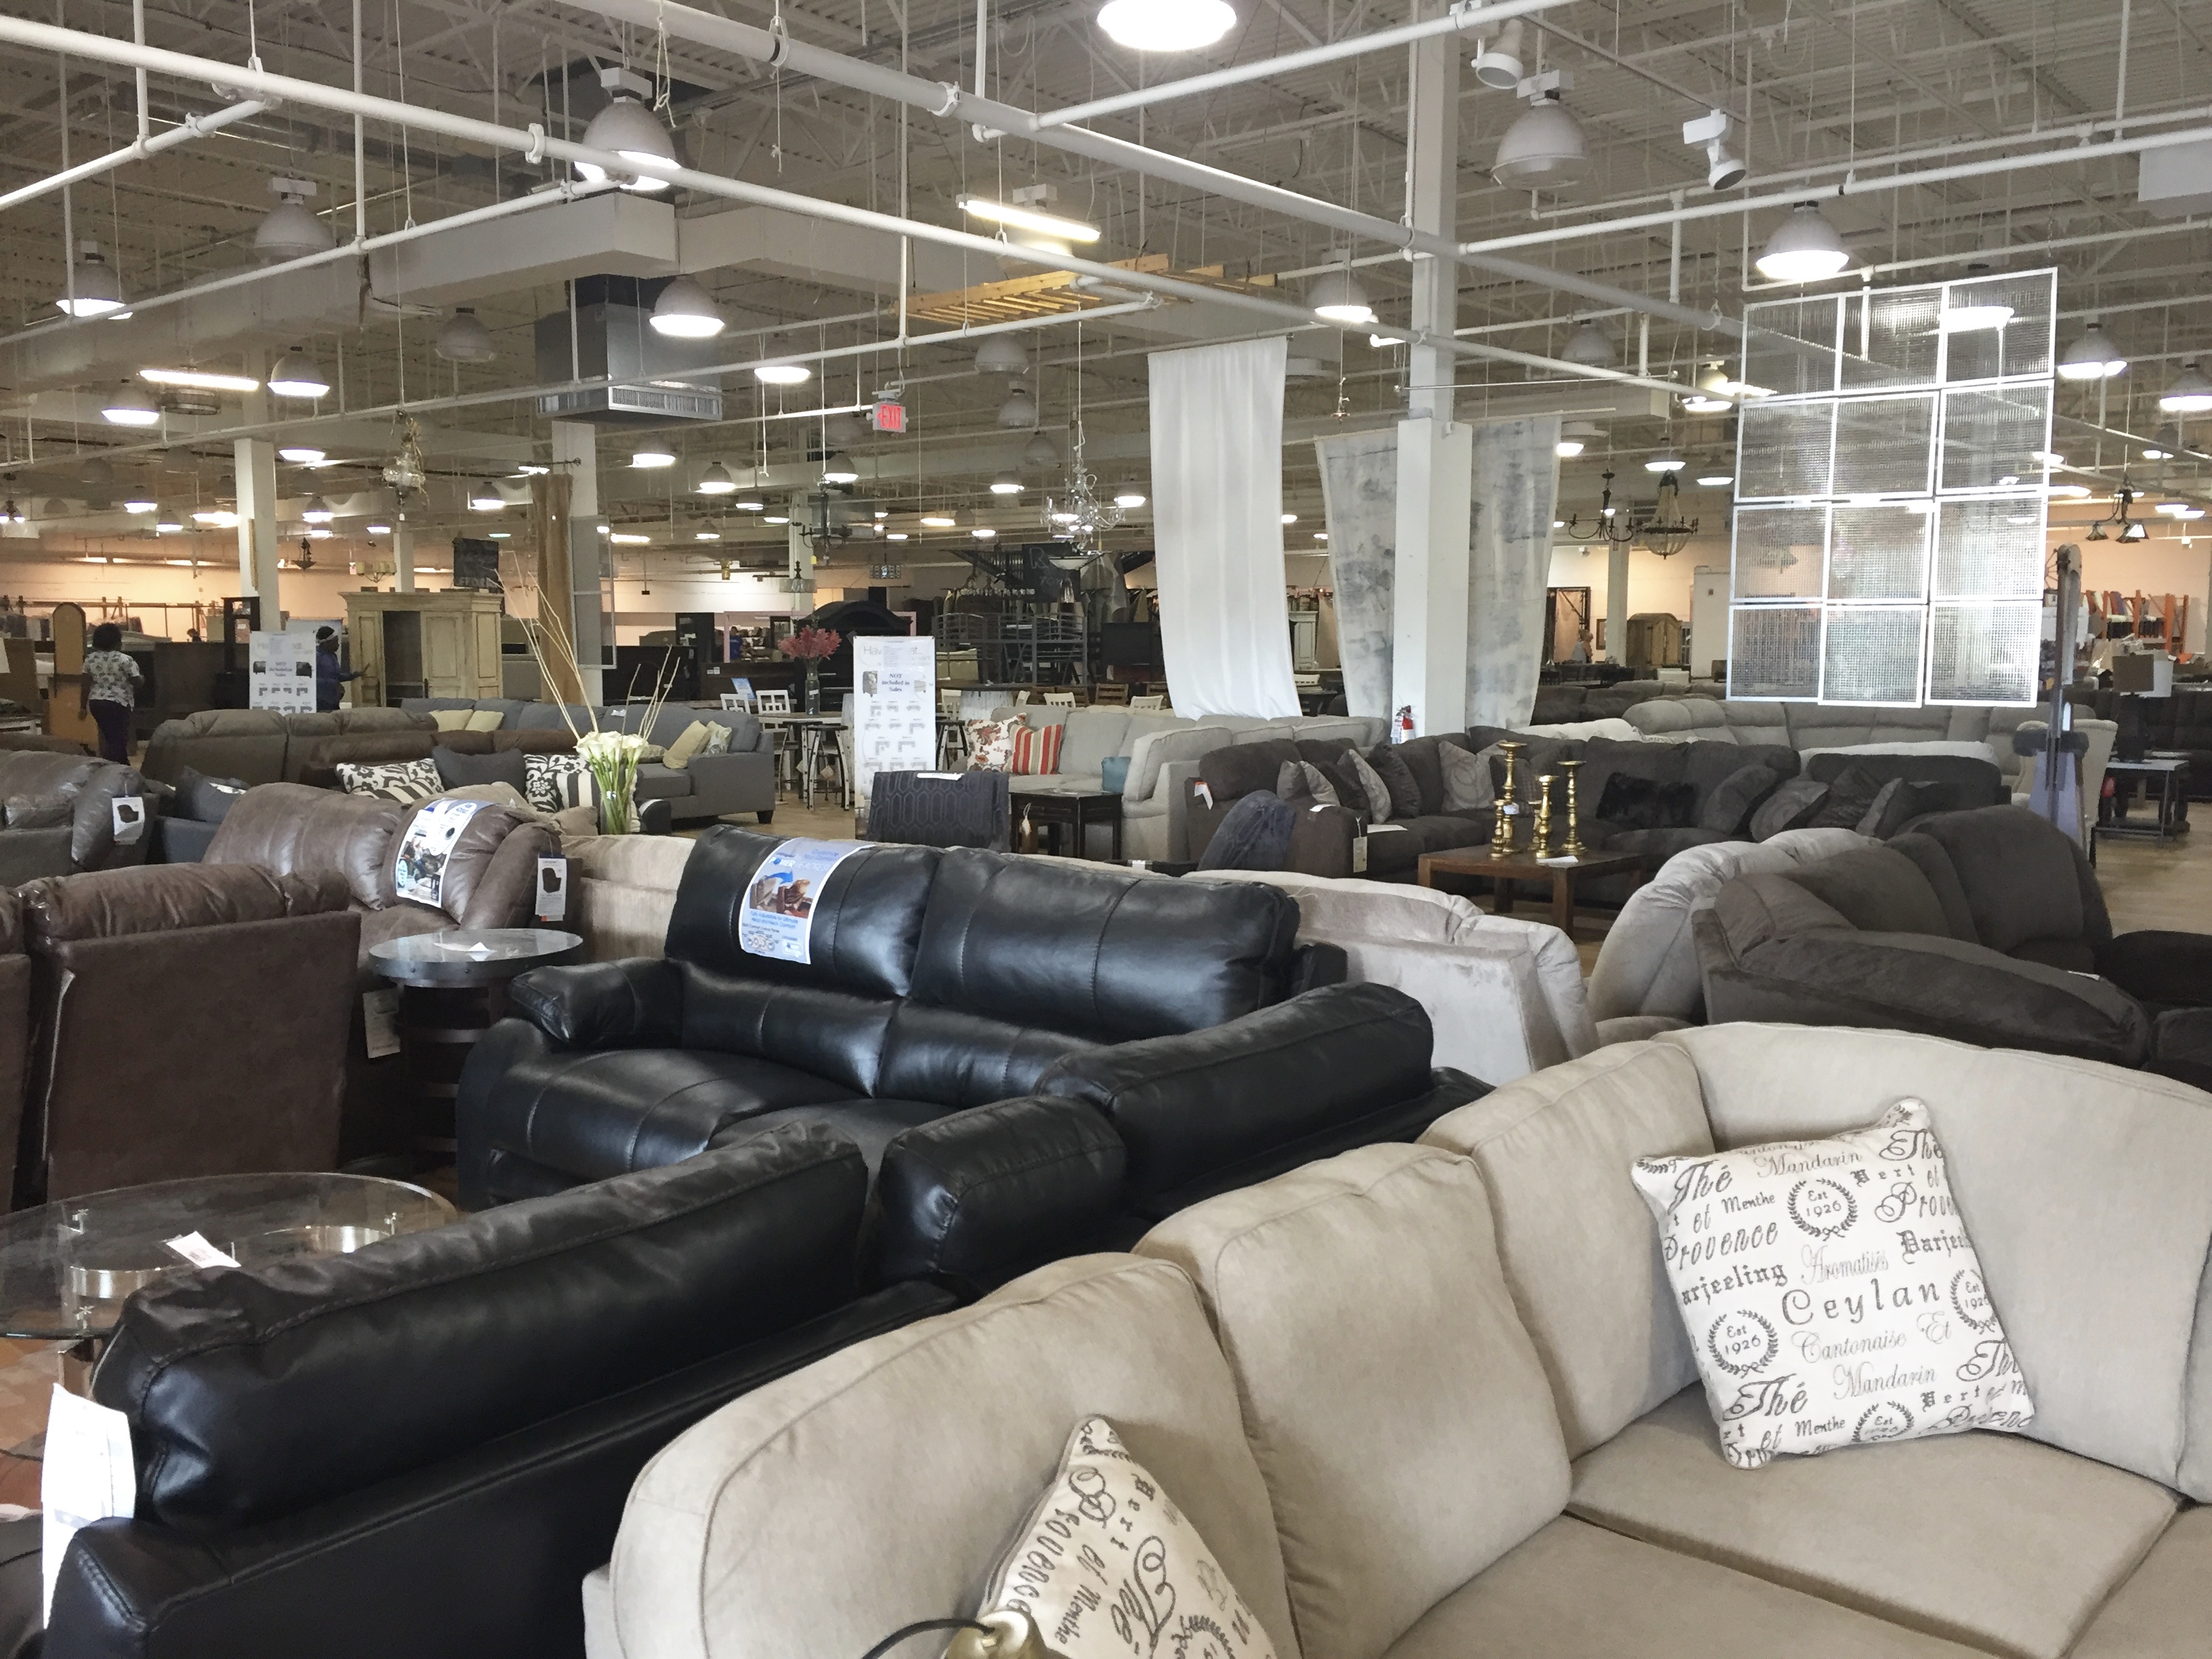 Bargains and Buyouts Cincinnati, OH- furniture store- bargain shopping- liquidation sales- home- decor- decorating